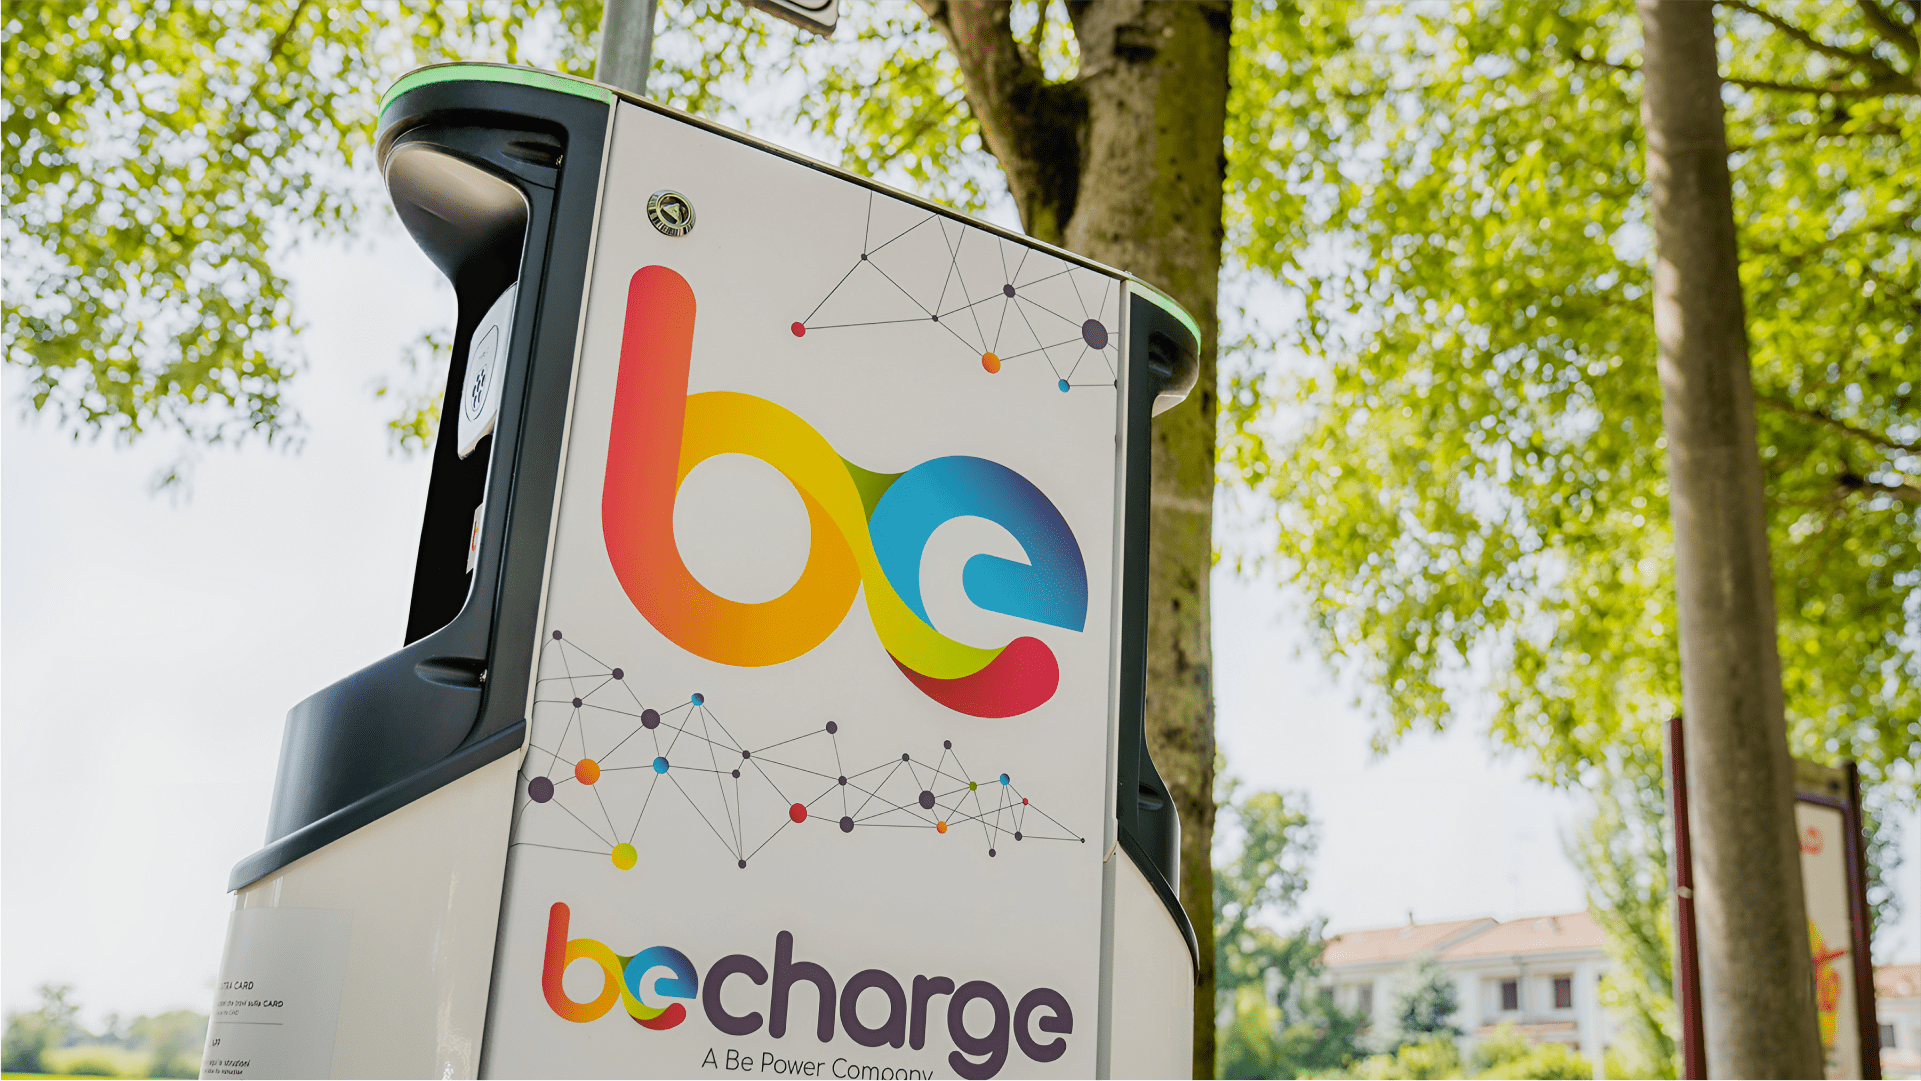 Be Charge s.r.l.is among the largest European operators available in the GO TO-U app.